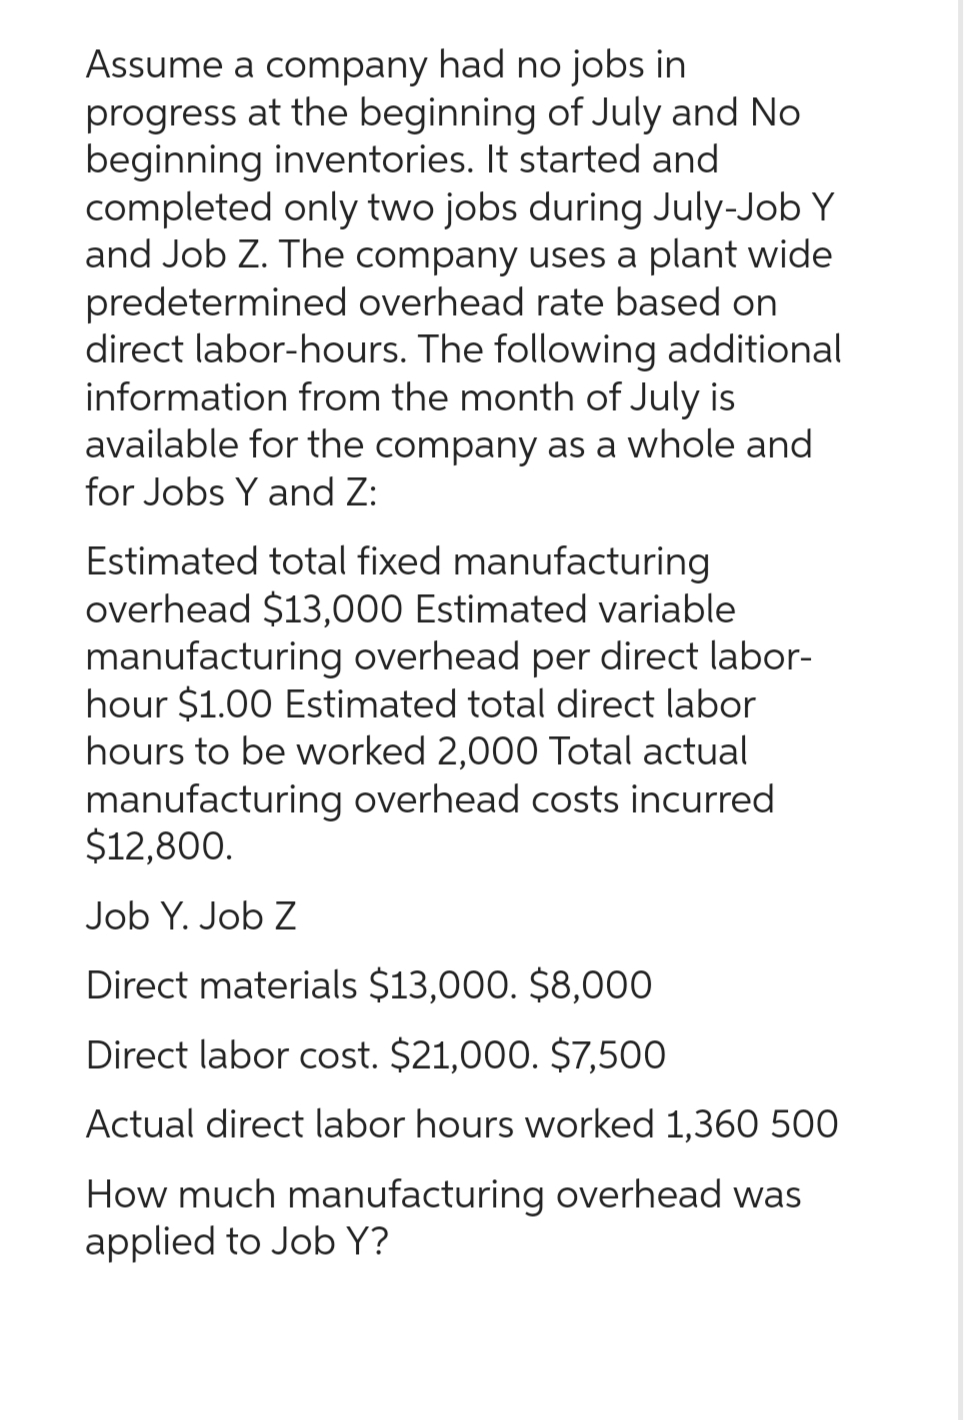 Assume a company had no jobs in
progress at the beginning of July and No
beginning inventories. It started and
completed only two jobs during July-Job Y
and Job Z. The company uses a plant wide
predetermined overhead rate based on
direct labor-hours. The following additional
information from the month of July is
available for the company as a whole and
for Jobs Y and Z:
Estimated total fixed manufacturing
overhead $13,000 Estimated variable
manufacturing overhead per direct labor-
hour $1.00 Estimated total direct labor
hours to be worked 2,000 Total actual
manufacturing overhead costs incurred
$12,800.
Job Y. Job Z
Direct materials $13,000. $8,000
Direct labor cost. $21,000. $7,500
Actual direct labor hours worked 1,360 500
How much manufacturing overhead was
applied to Job Y?